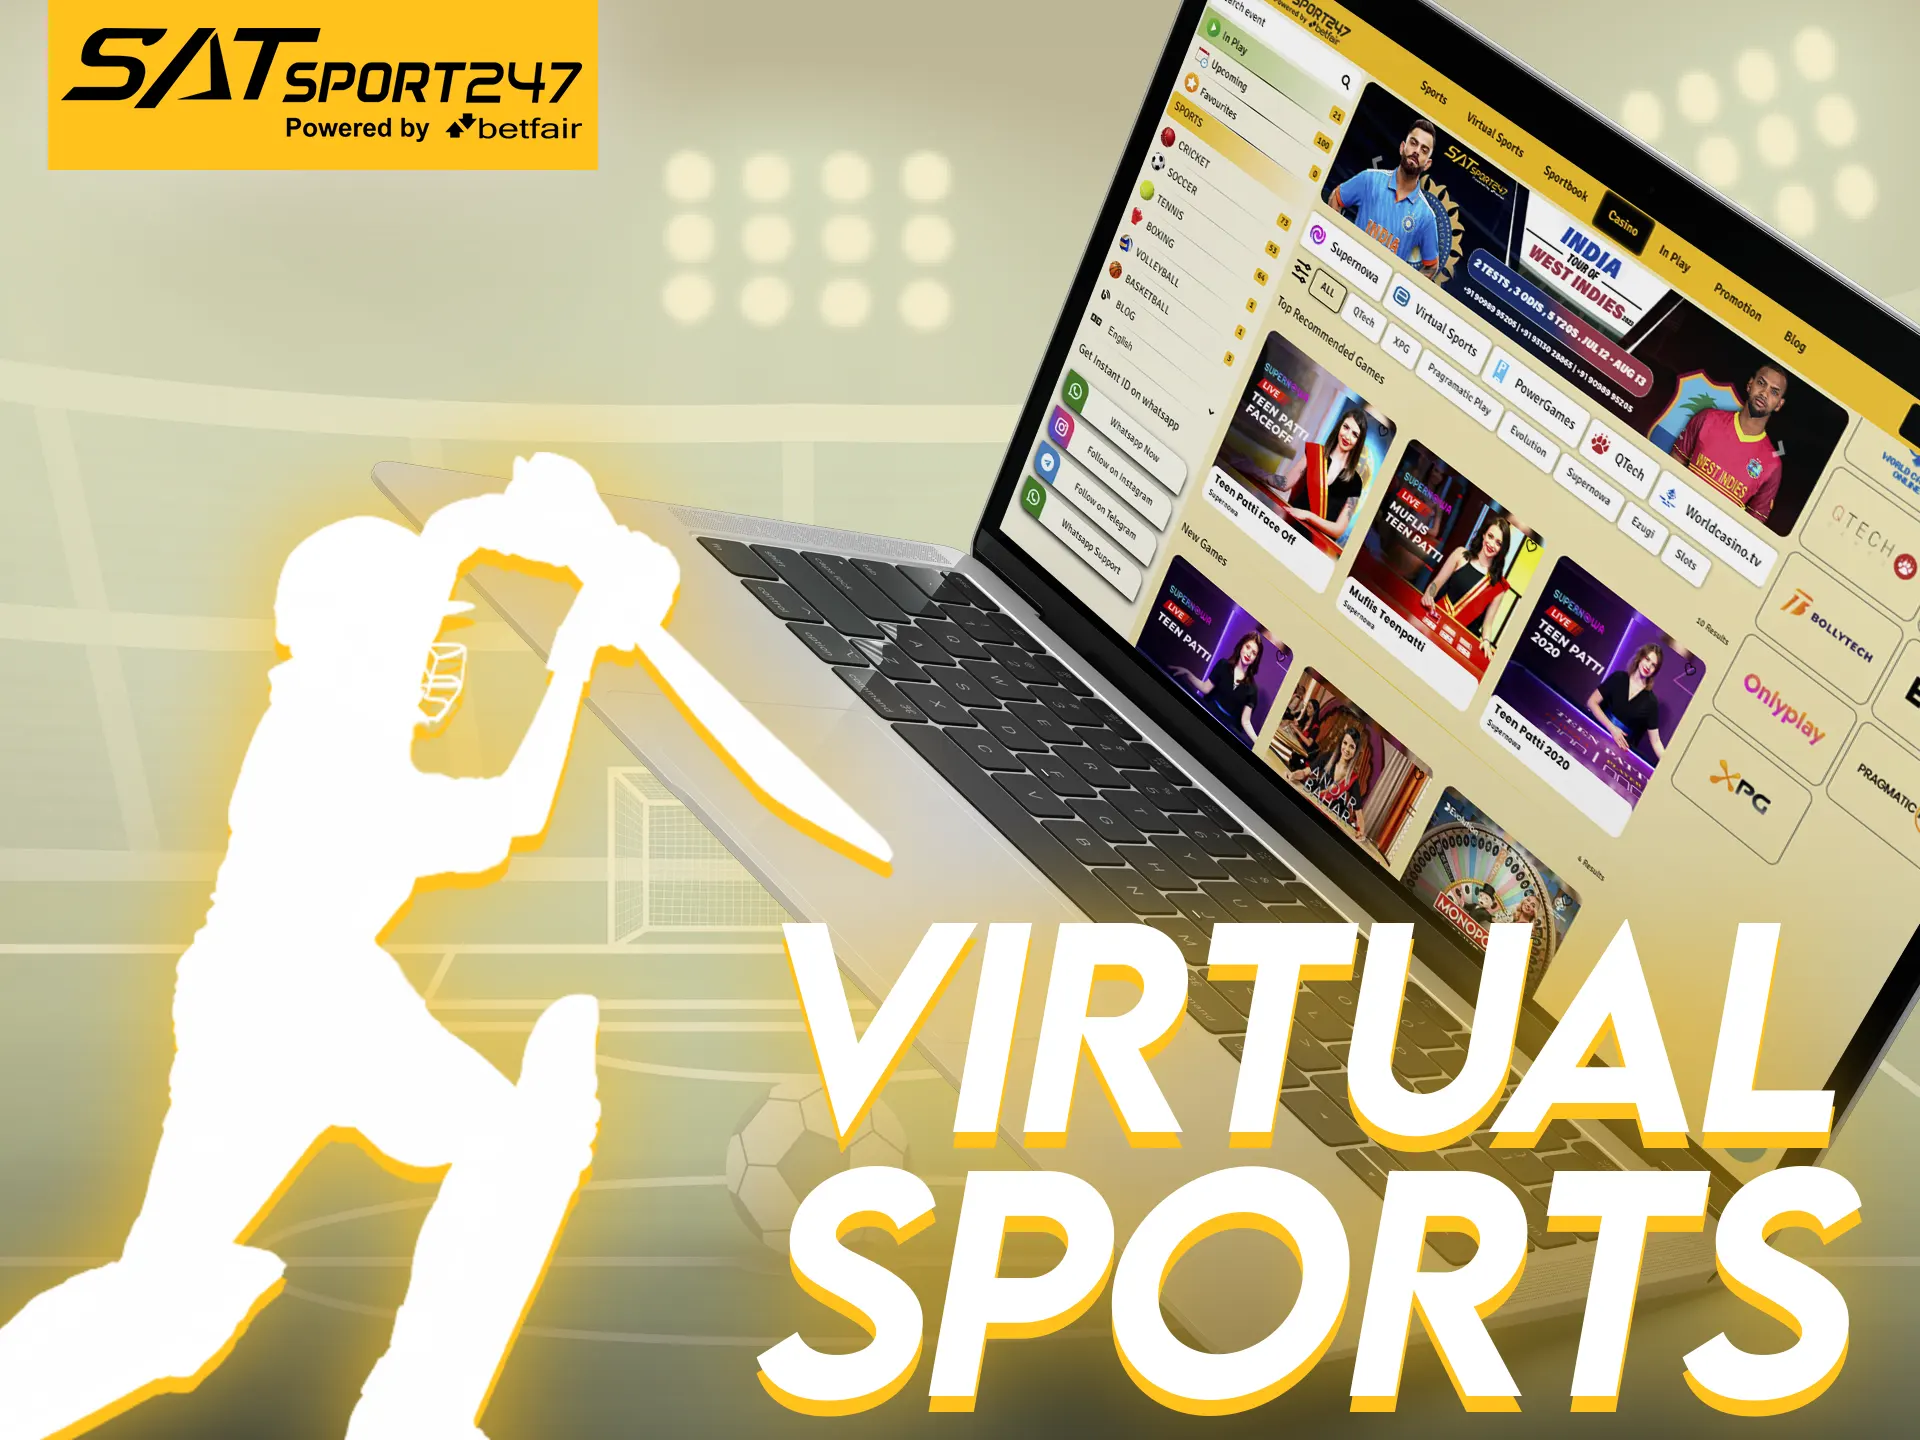 In Satsport247, you can bet on virtual sports as well.